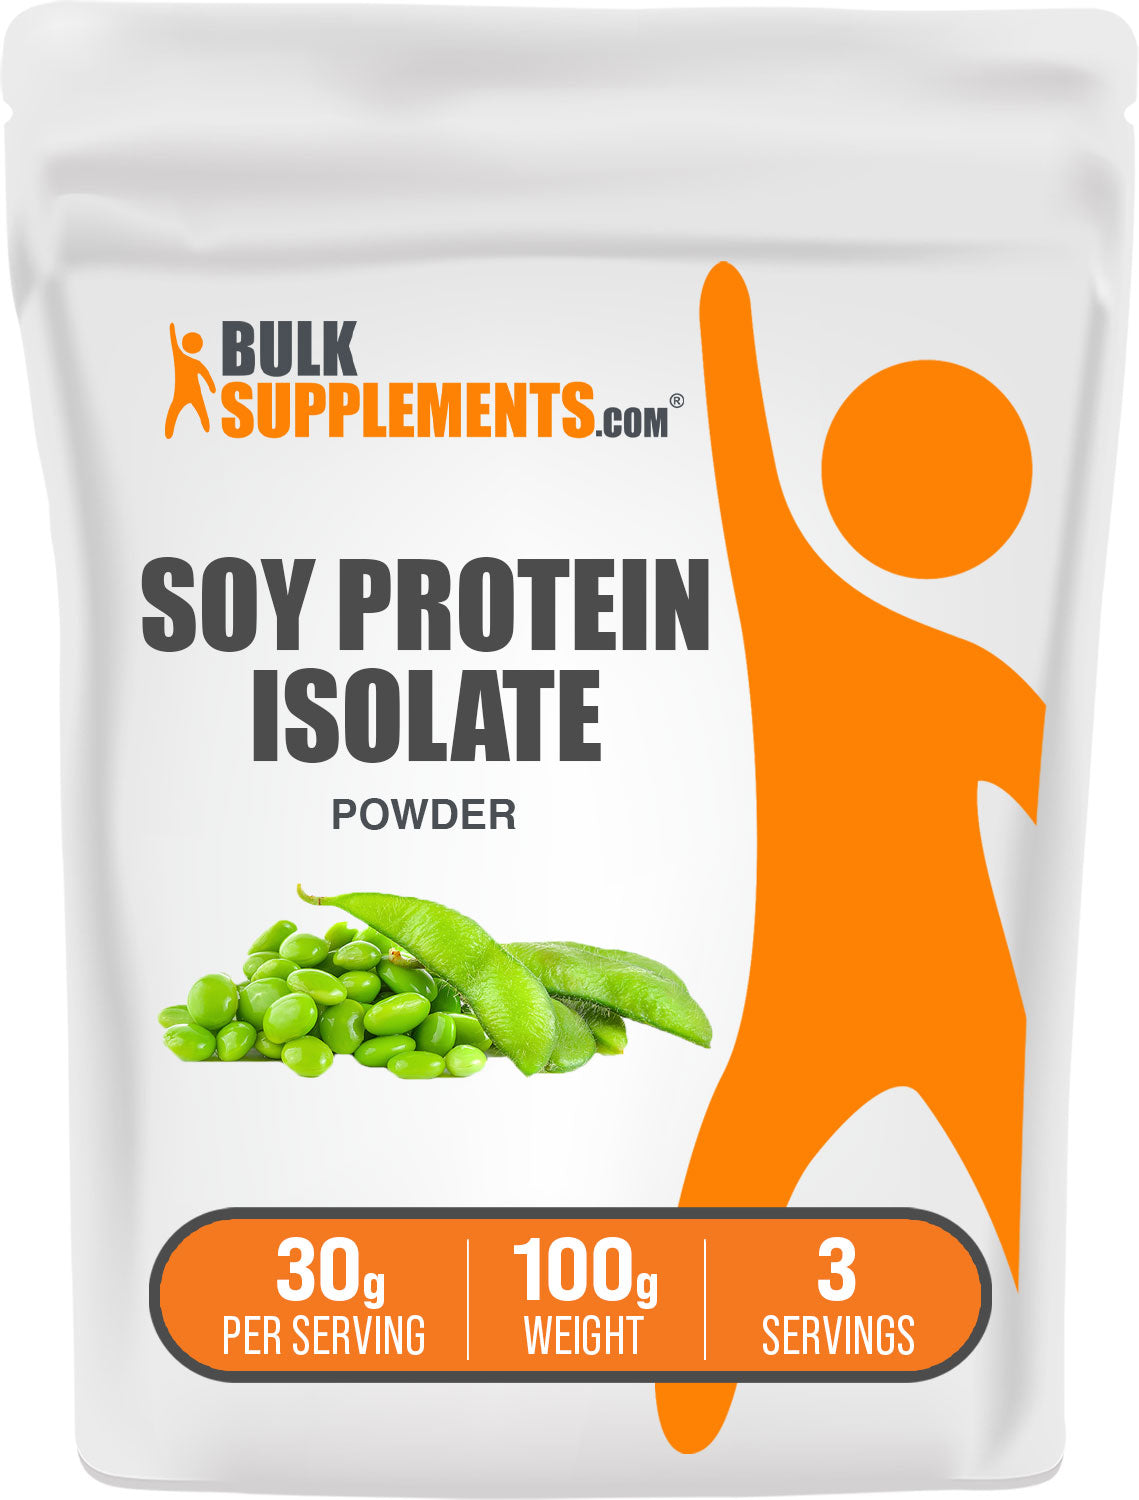 BulkSupplements Soy Protein Isolate Powder 100g bag